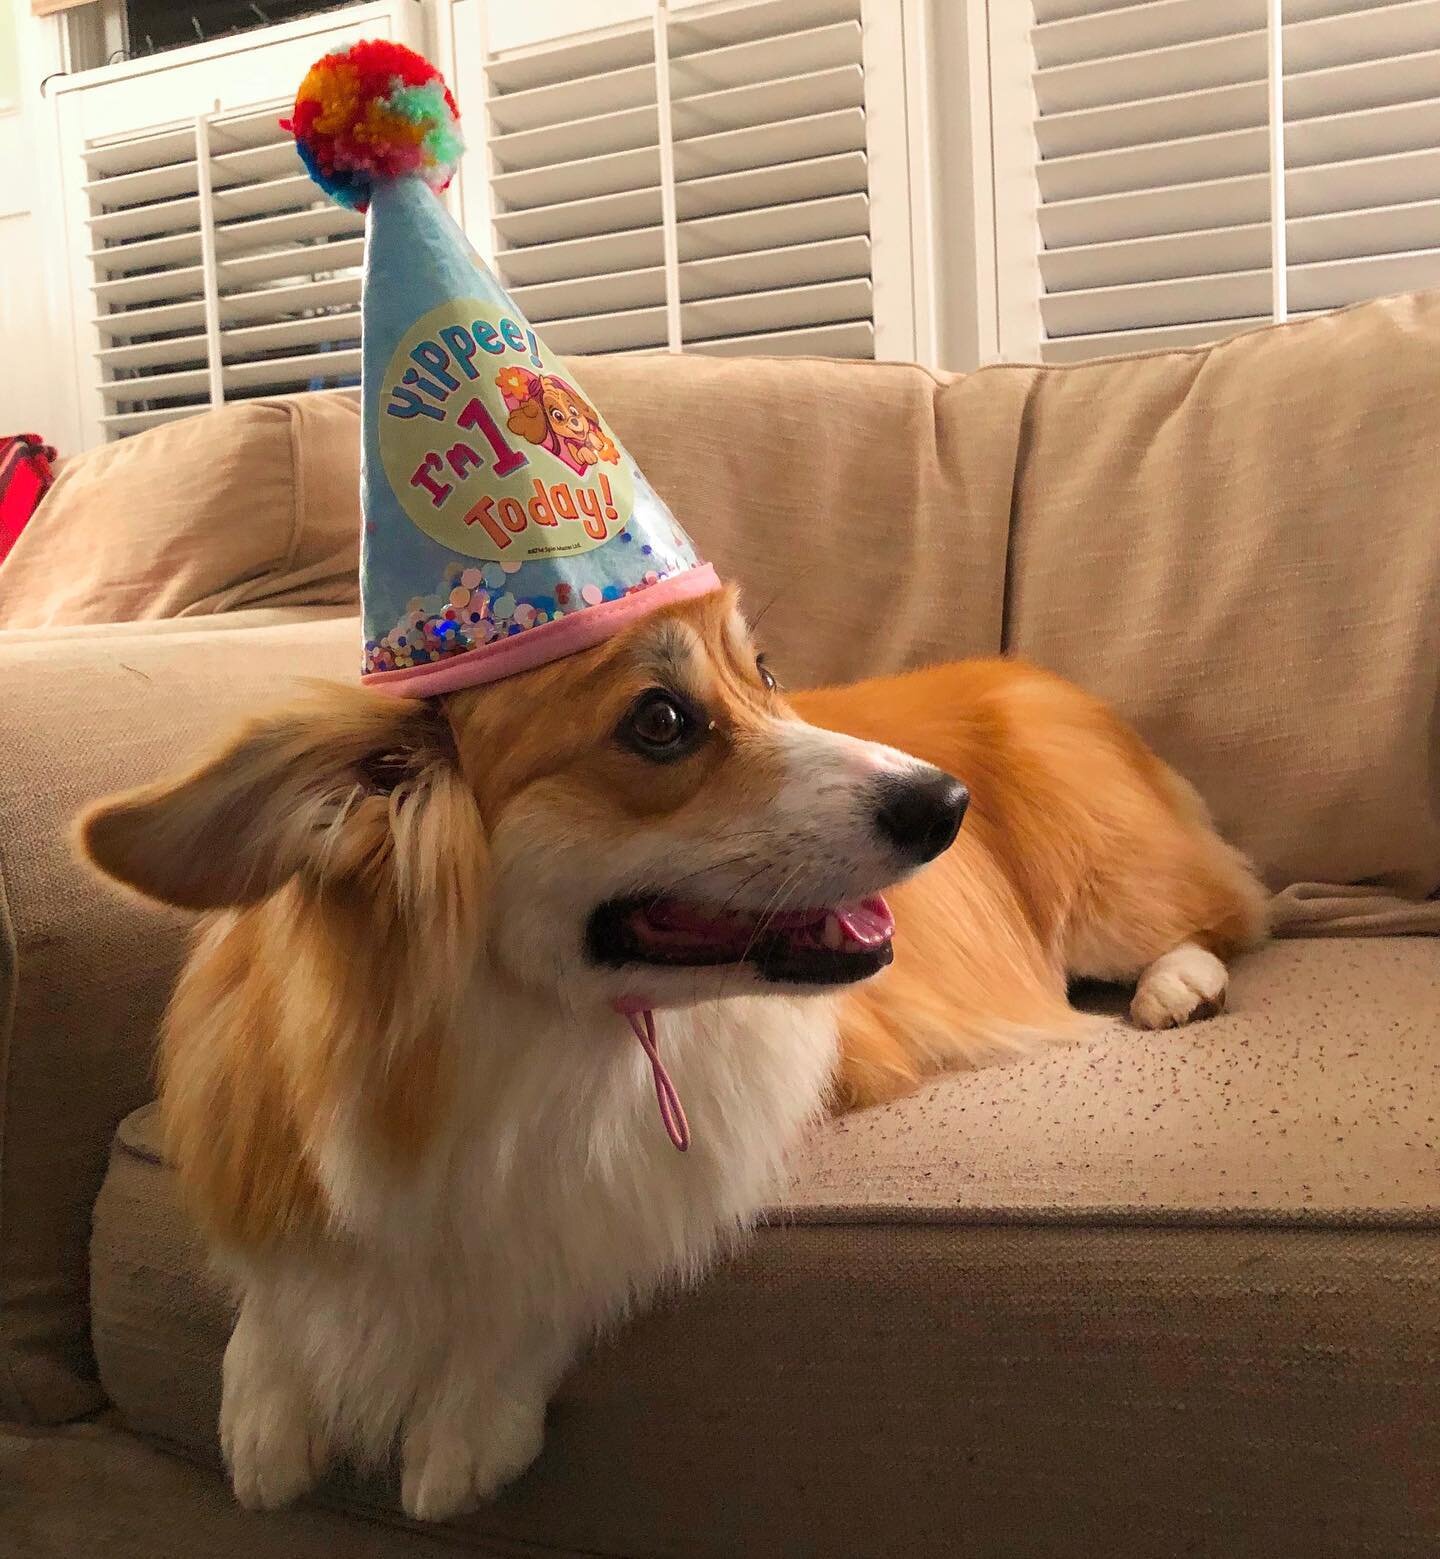 january first is always fun, but this year it&rsquo;s special because winnie turns ONE. 🥳 

happy 🎉 FIRST birthday 🎉 to my favorite new year&rsquo;s corgi baby.